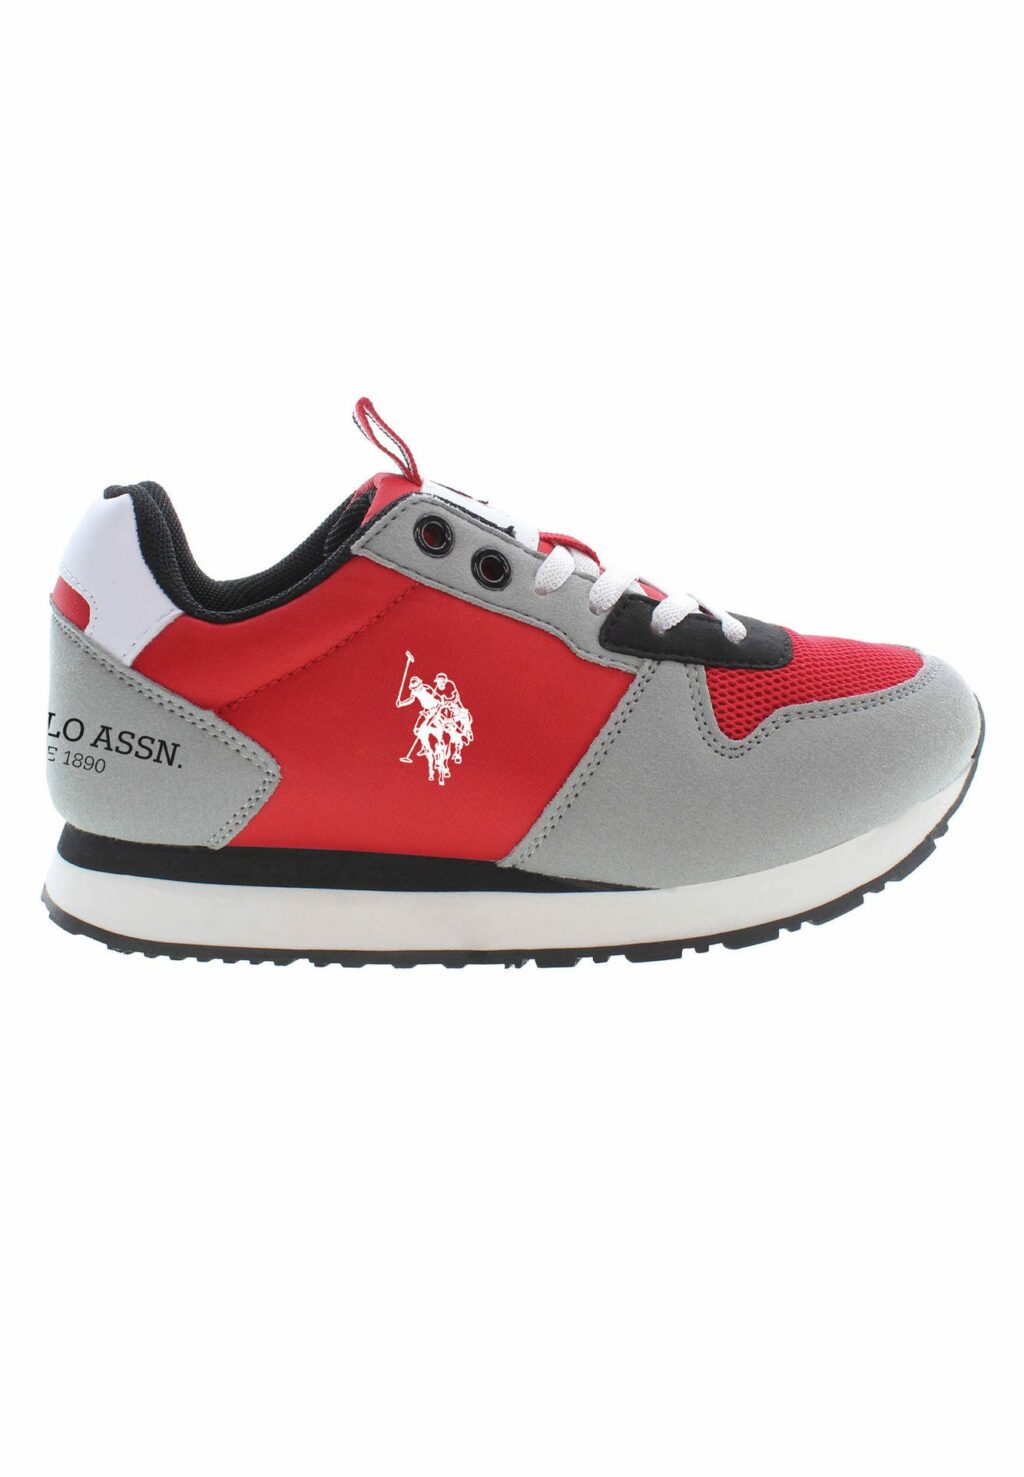 US POLO BEST PRICE RED SPORTS SHOES FOR KIDS NOBIK008K3TH1_ROSSO_RED-LGR01